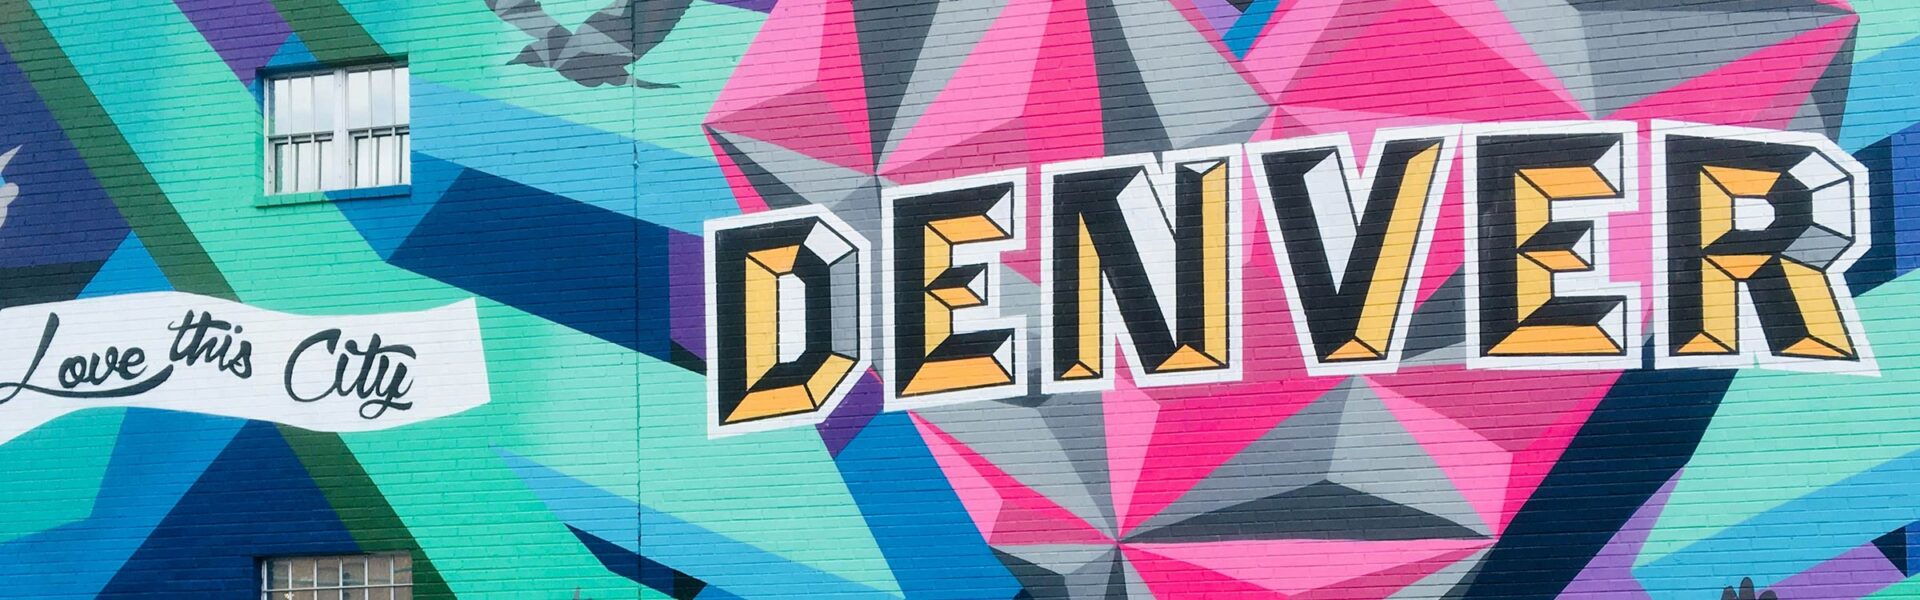 A colorful mural that says "Love this City" and "Denver."